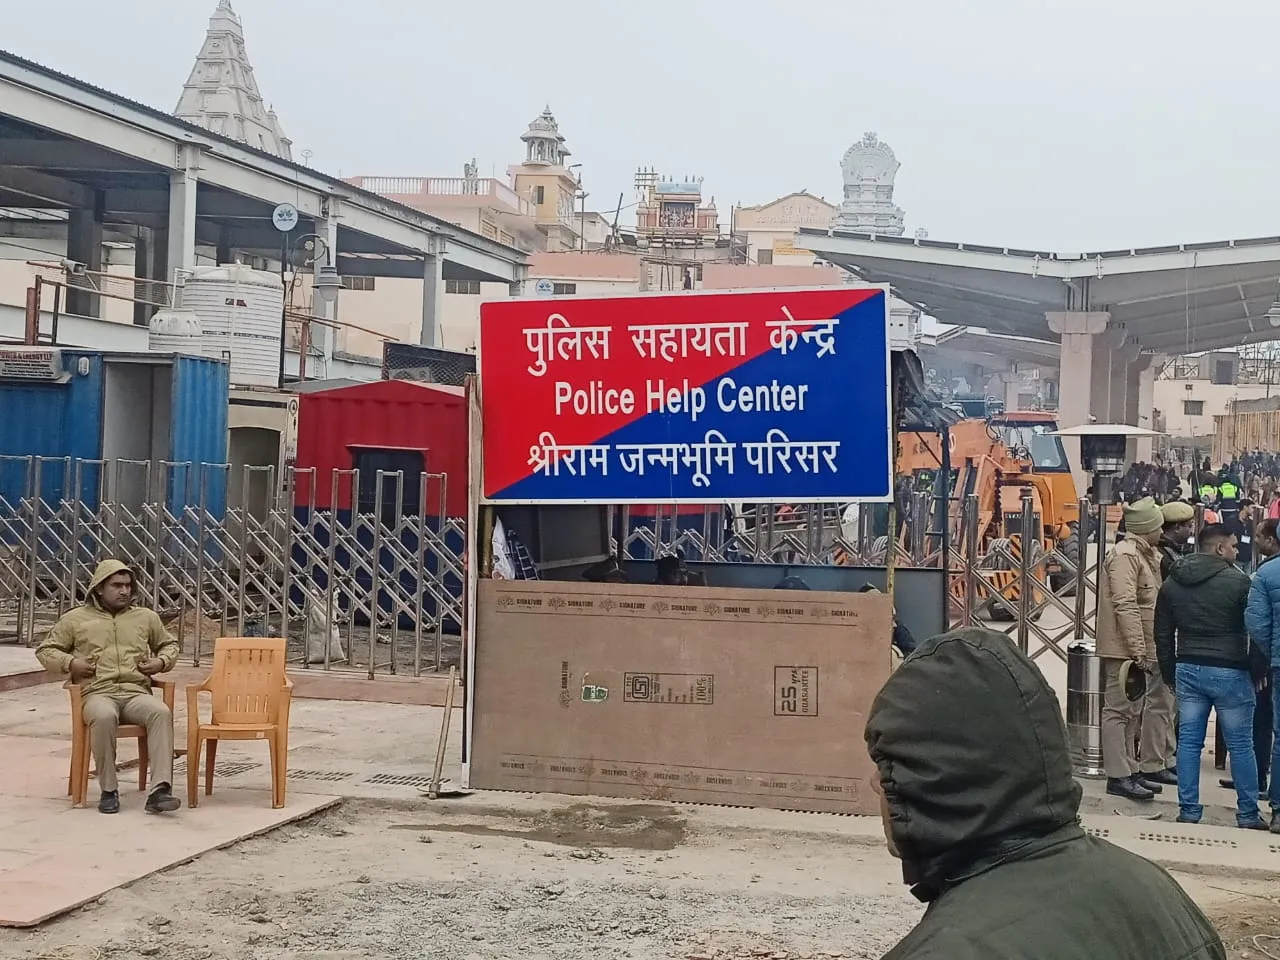 Police help center in Ayodhya